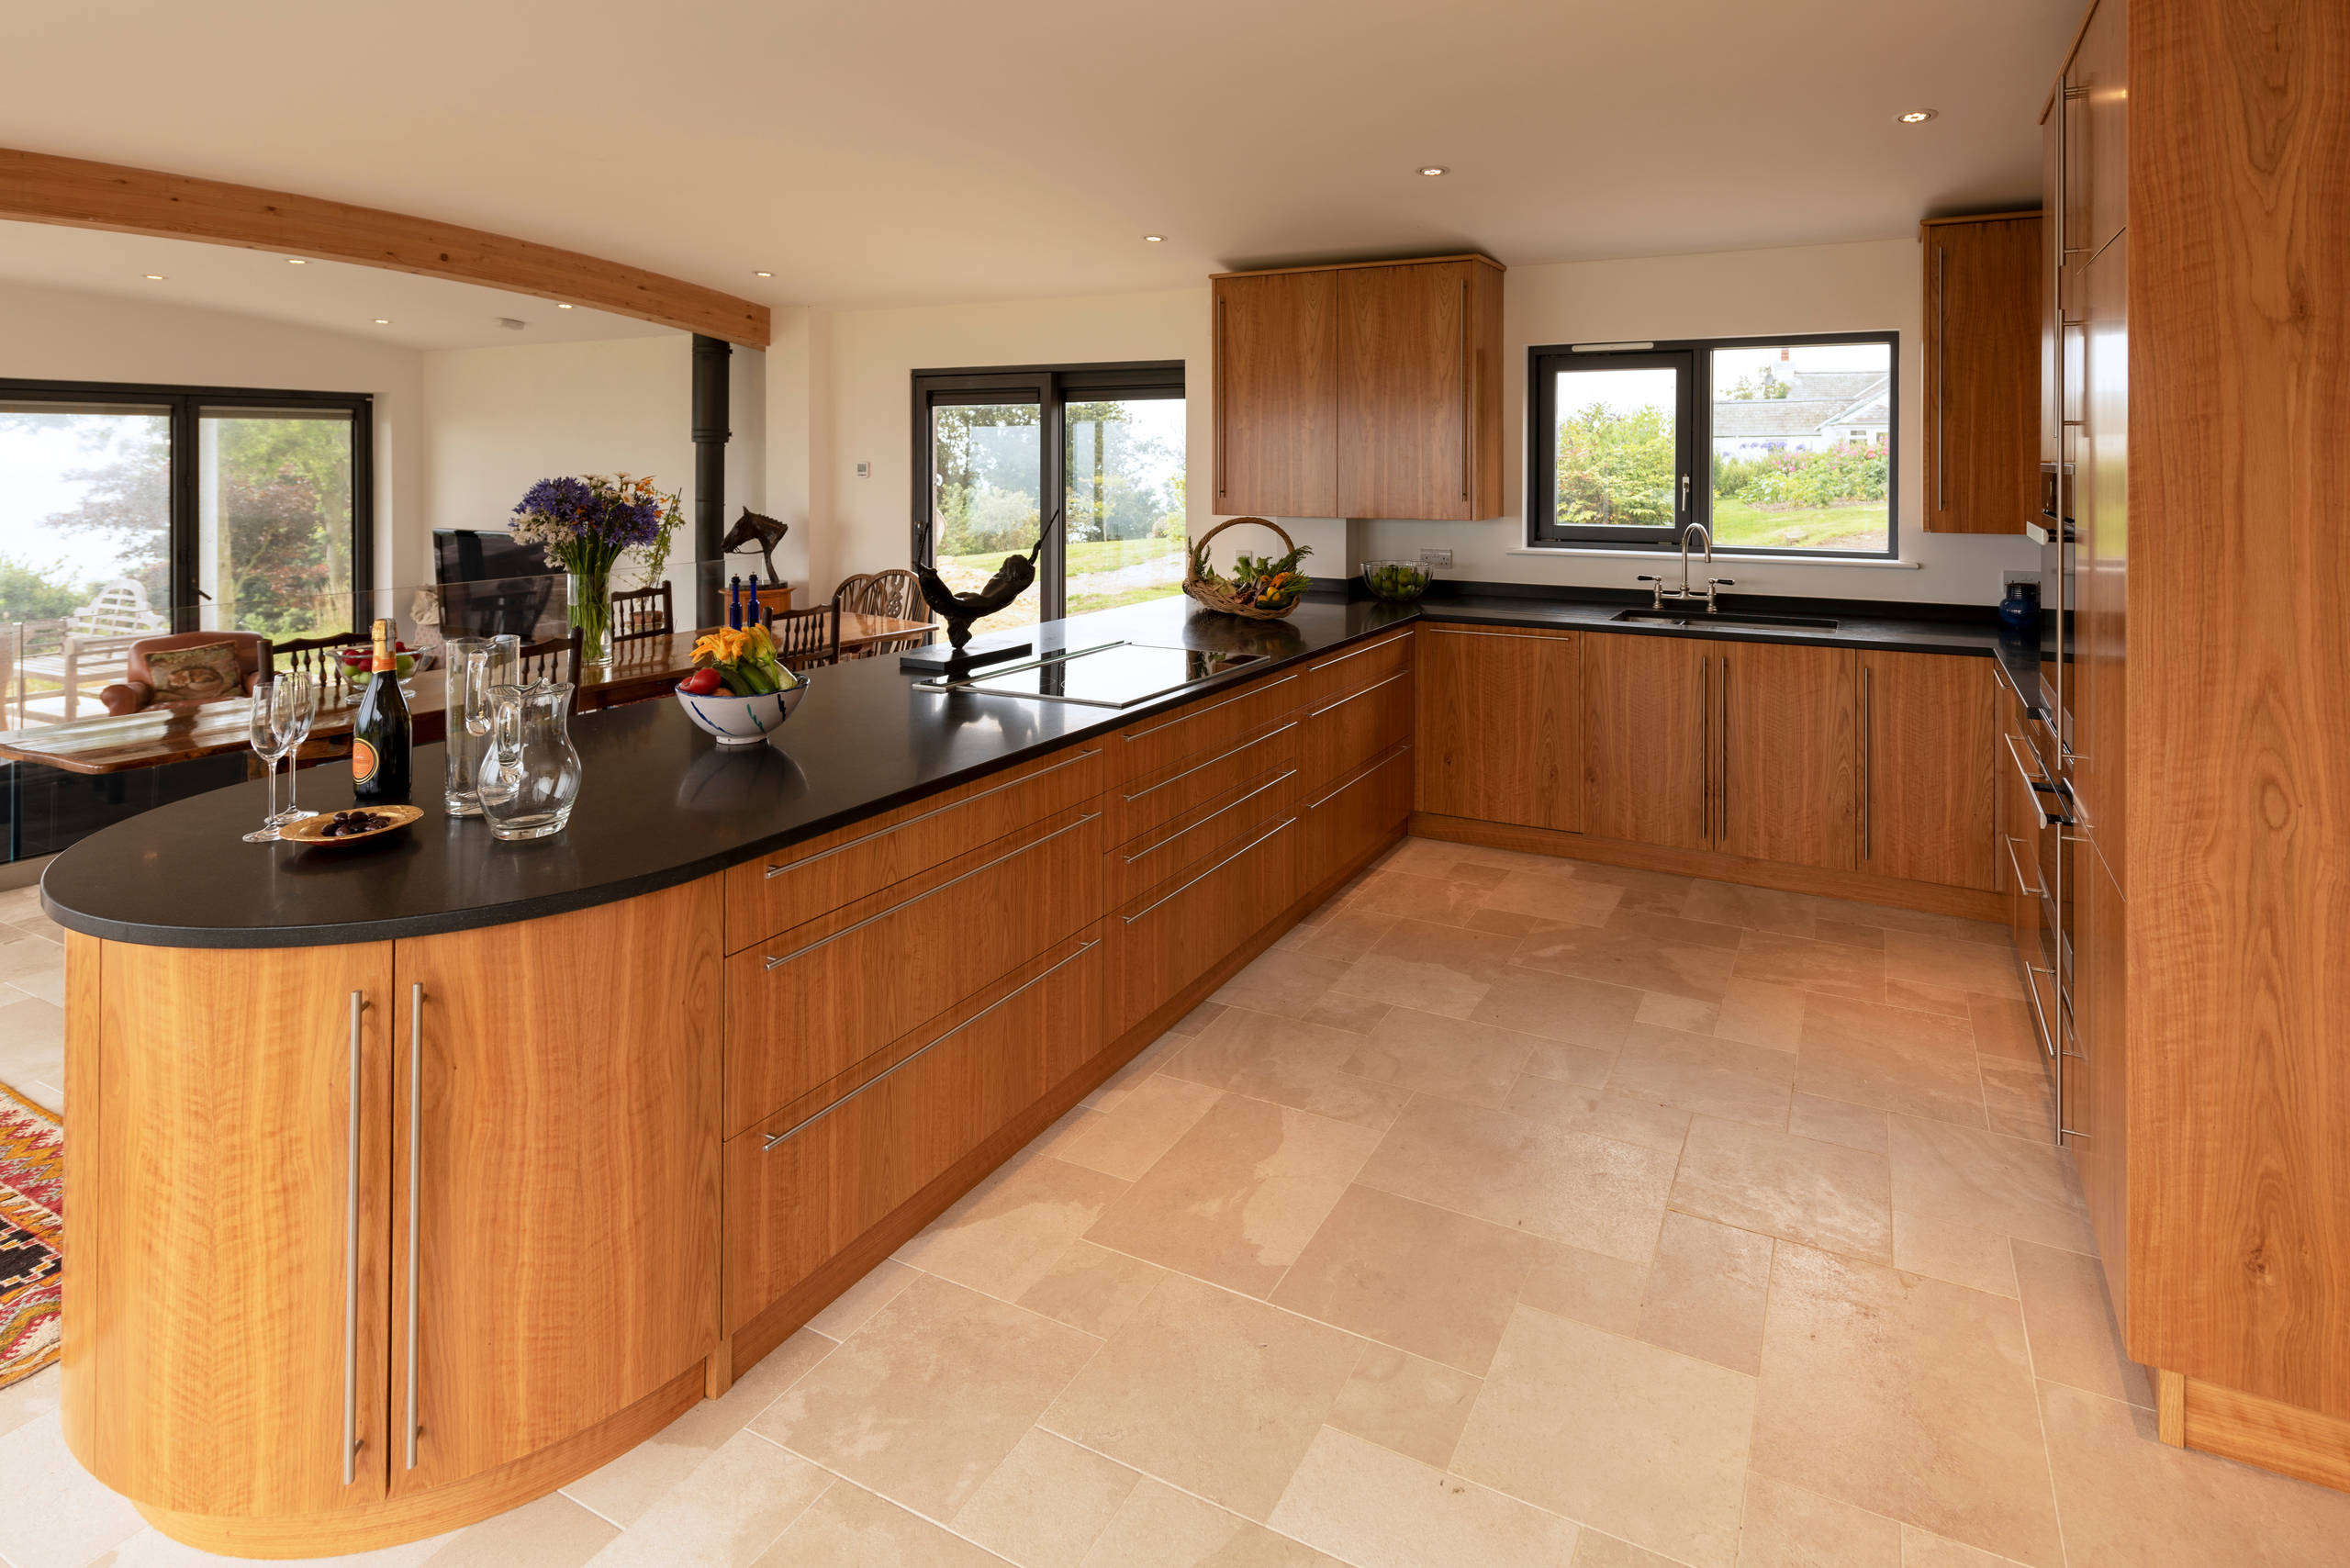 The kitchen was designed and made for a modern new build house on the Isle of Wight. In a stunning location with a fabulous garden. The kitchen was designed to compliment and work in harmony with the